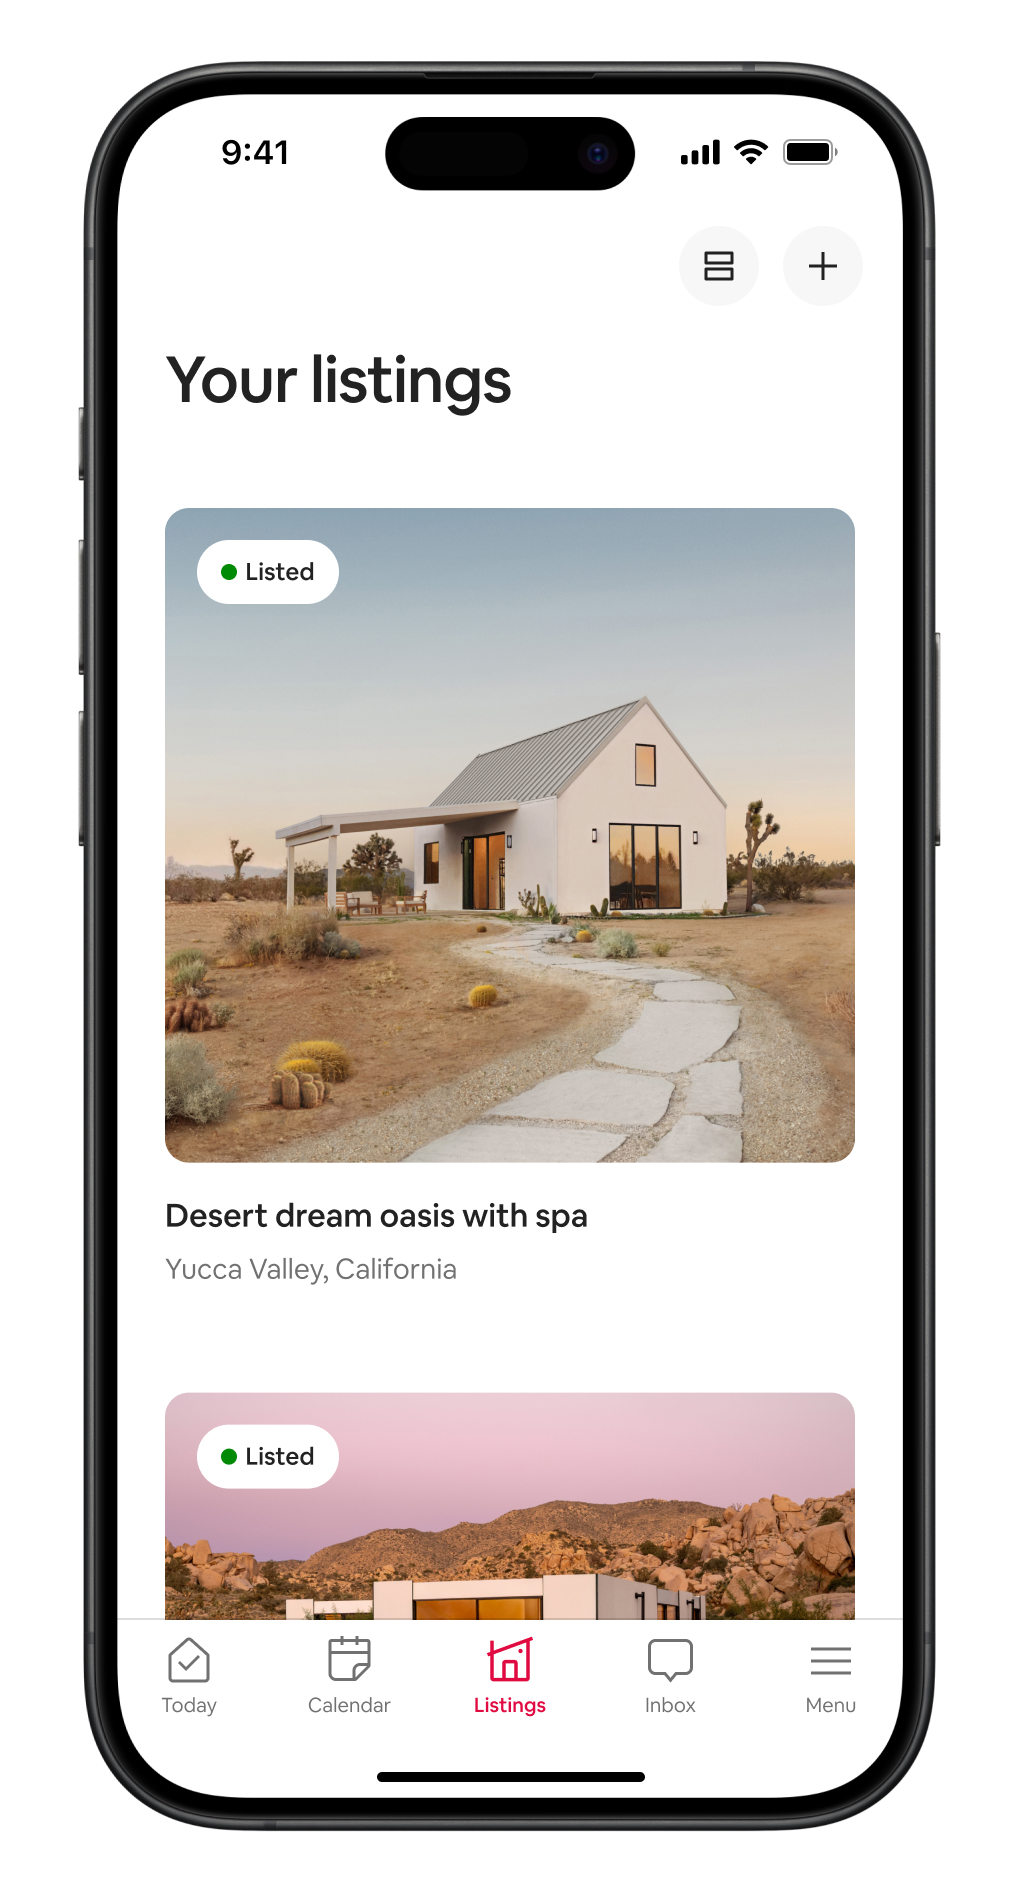 Phone screen with the Airbnb Listings Tab open, showcasing user listings.